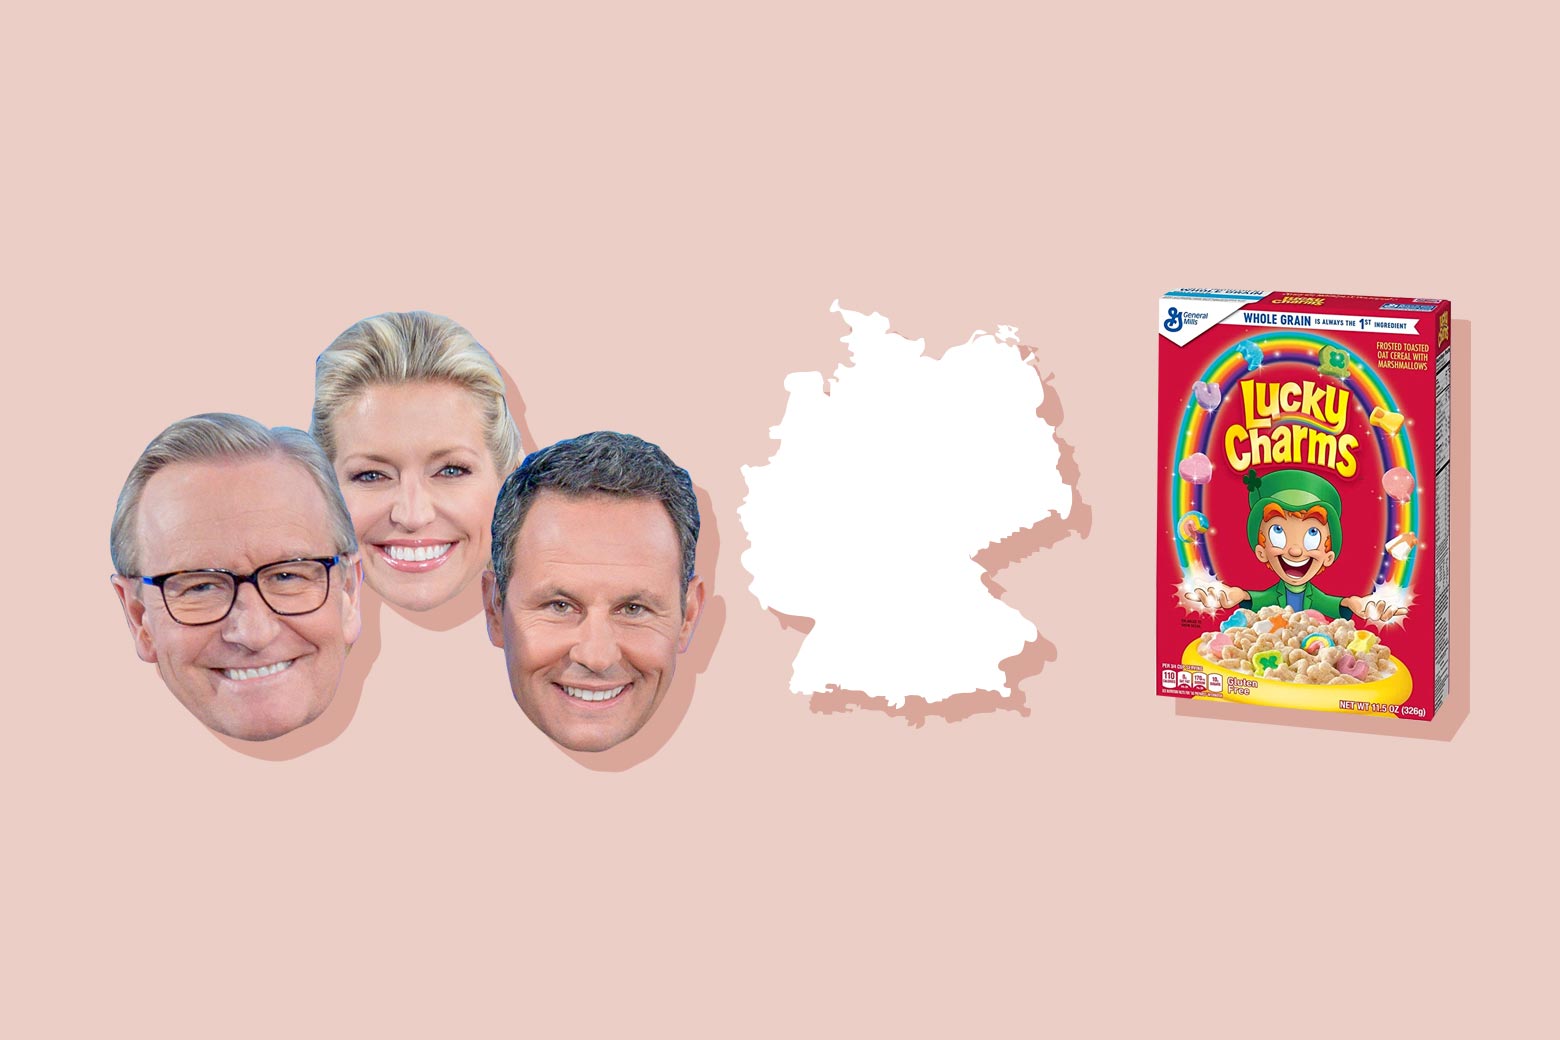 The Fox & Friends hosts, the outline of Germany, and a box of Lucky Charms.